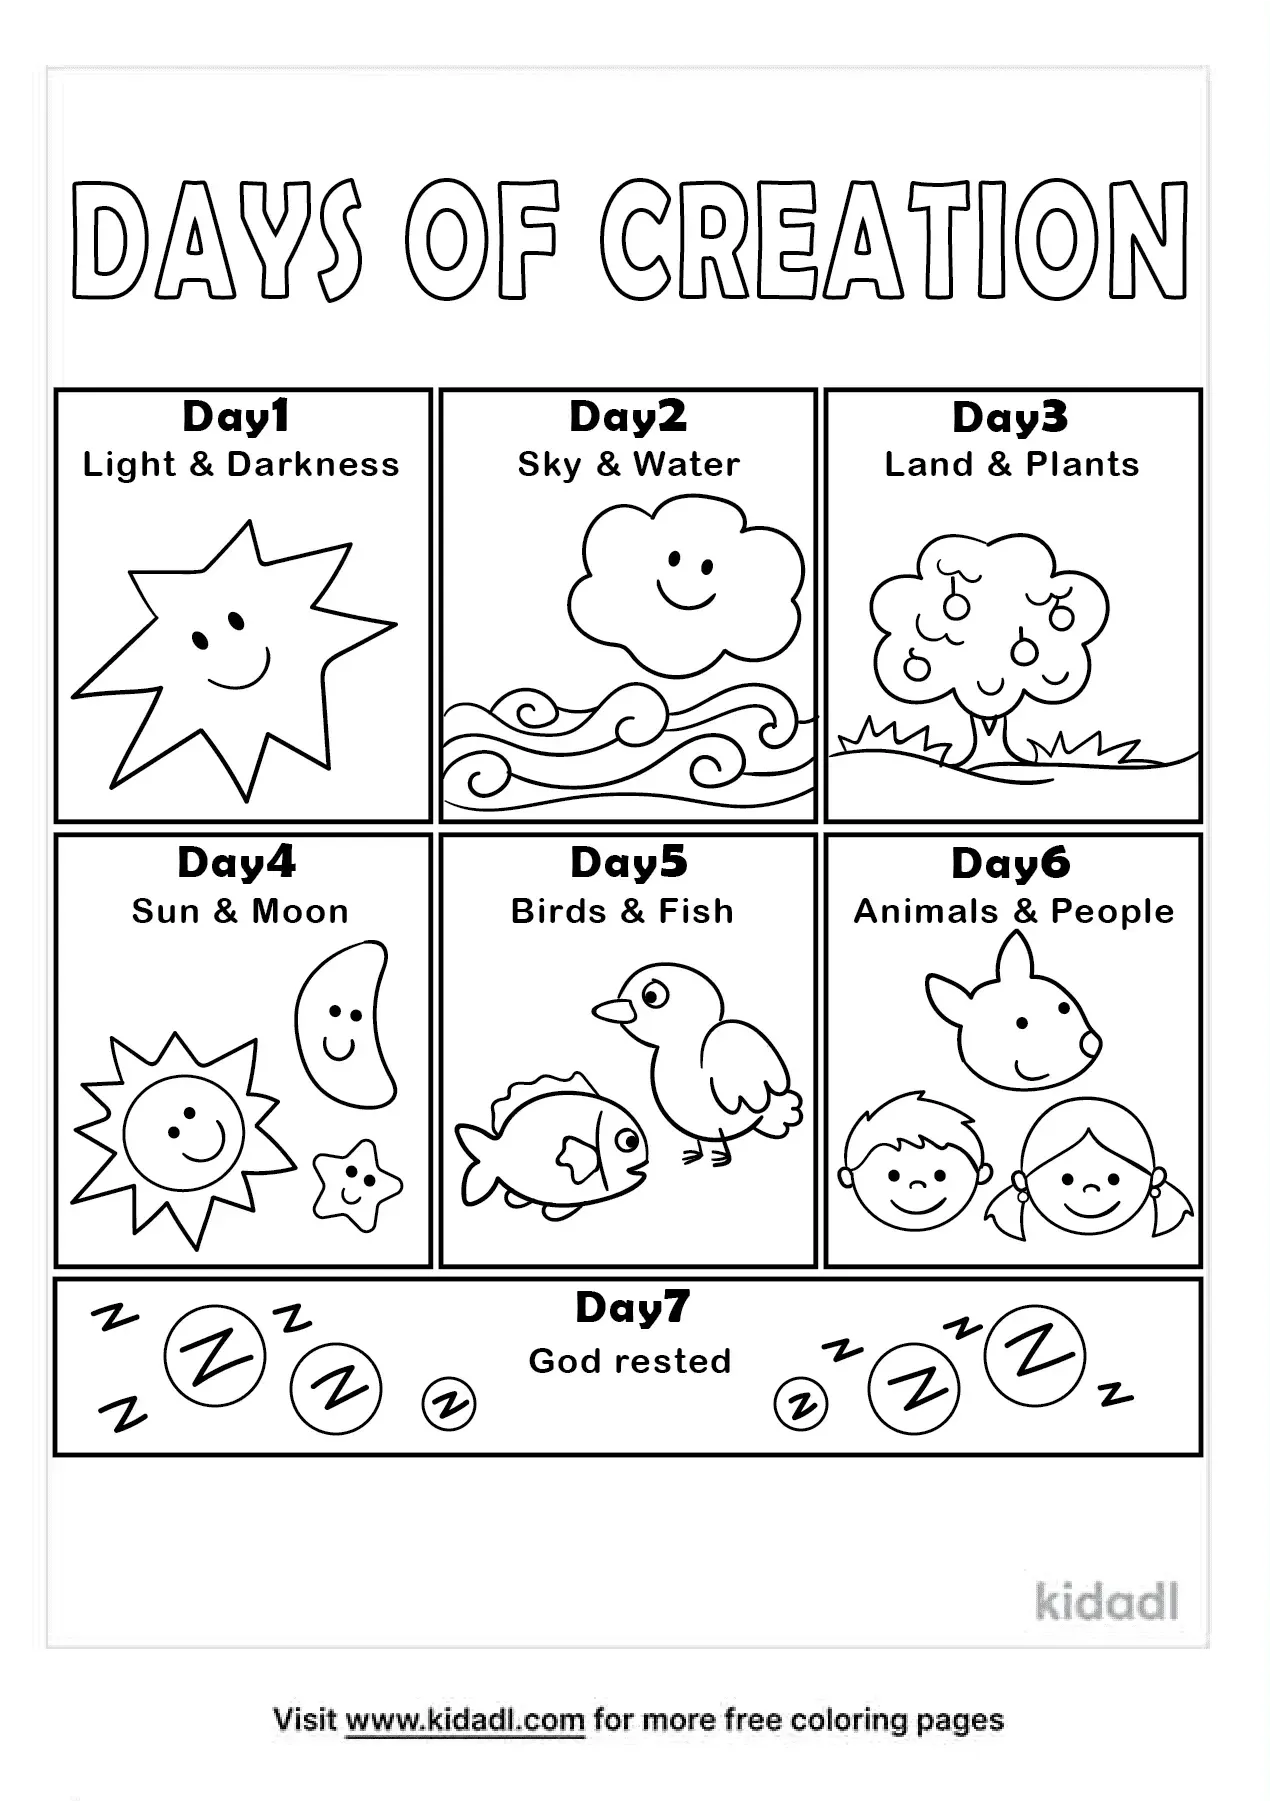 Free 7 Days Of Creation Coloring Page | Coloring Page Printables | Kidadl